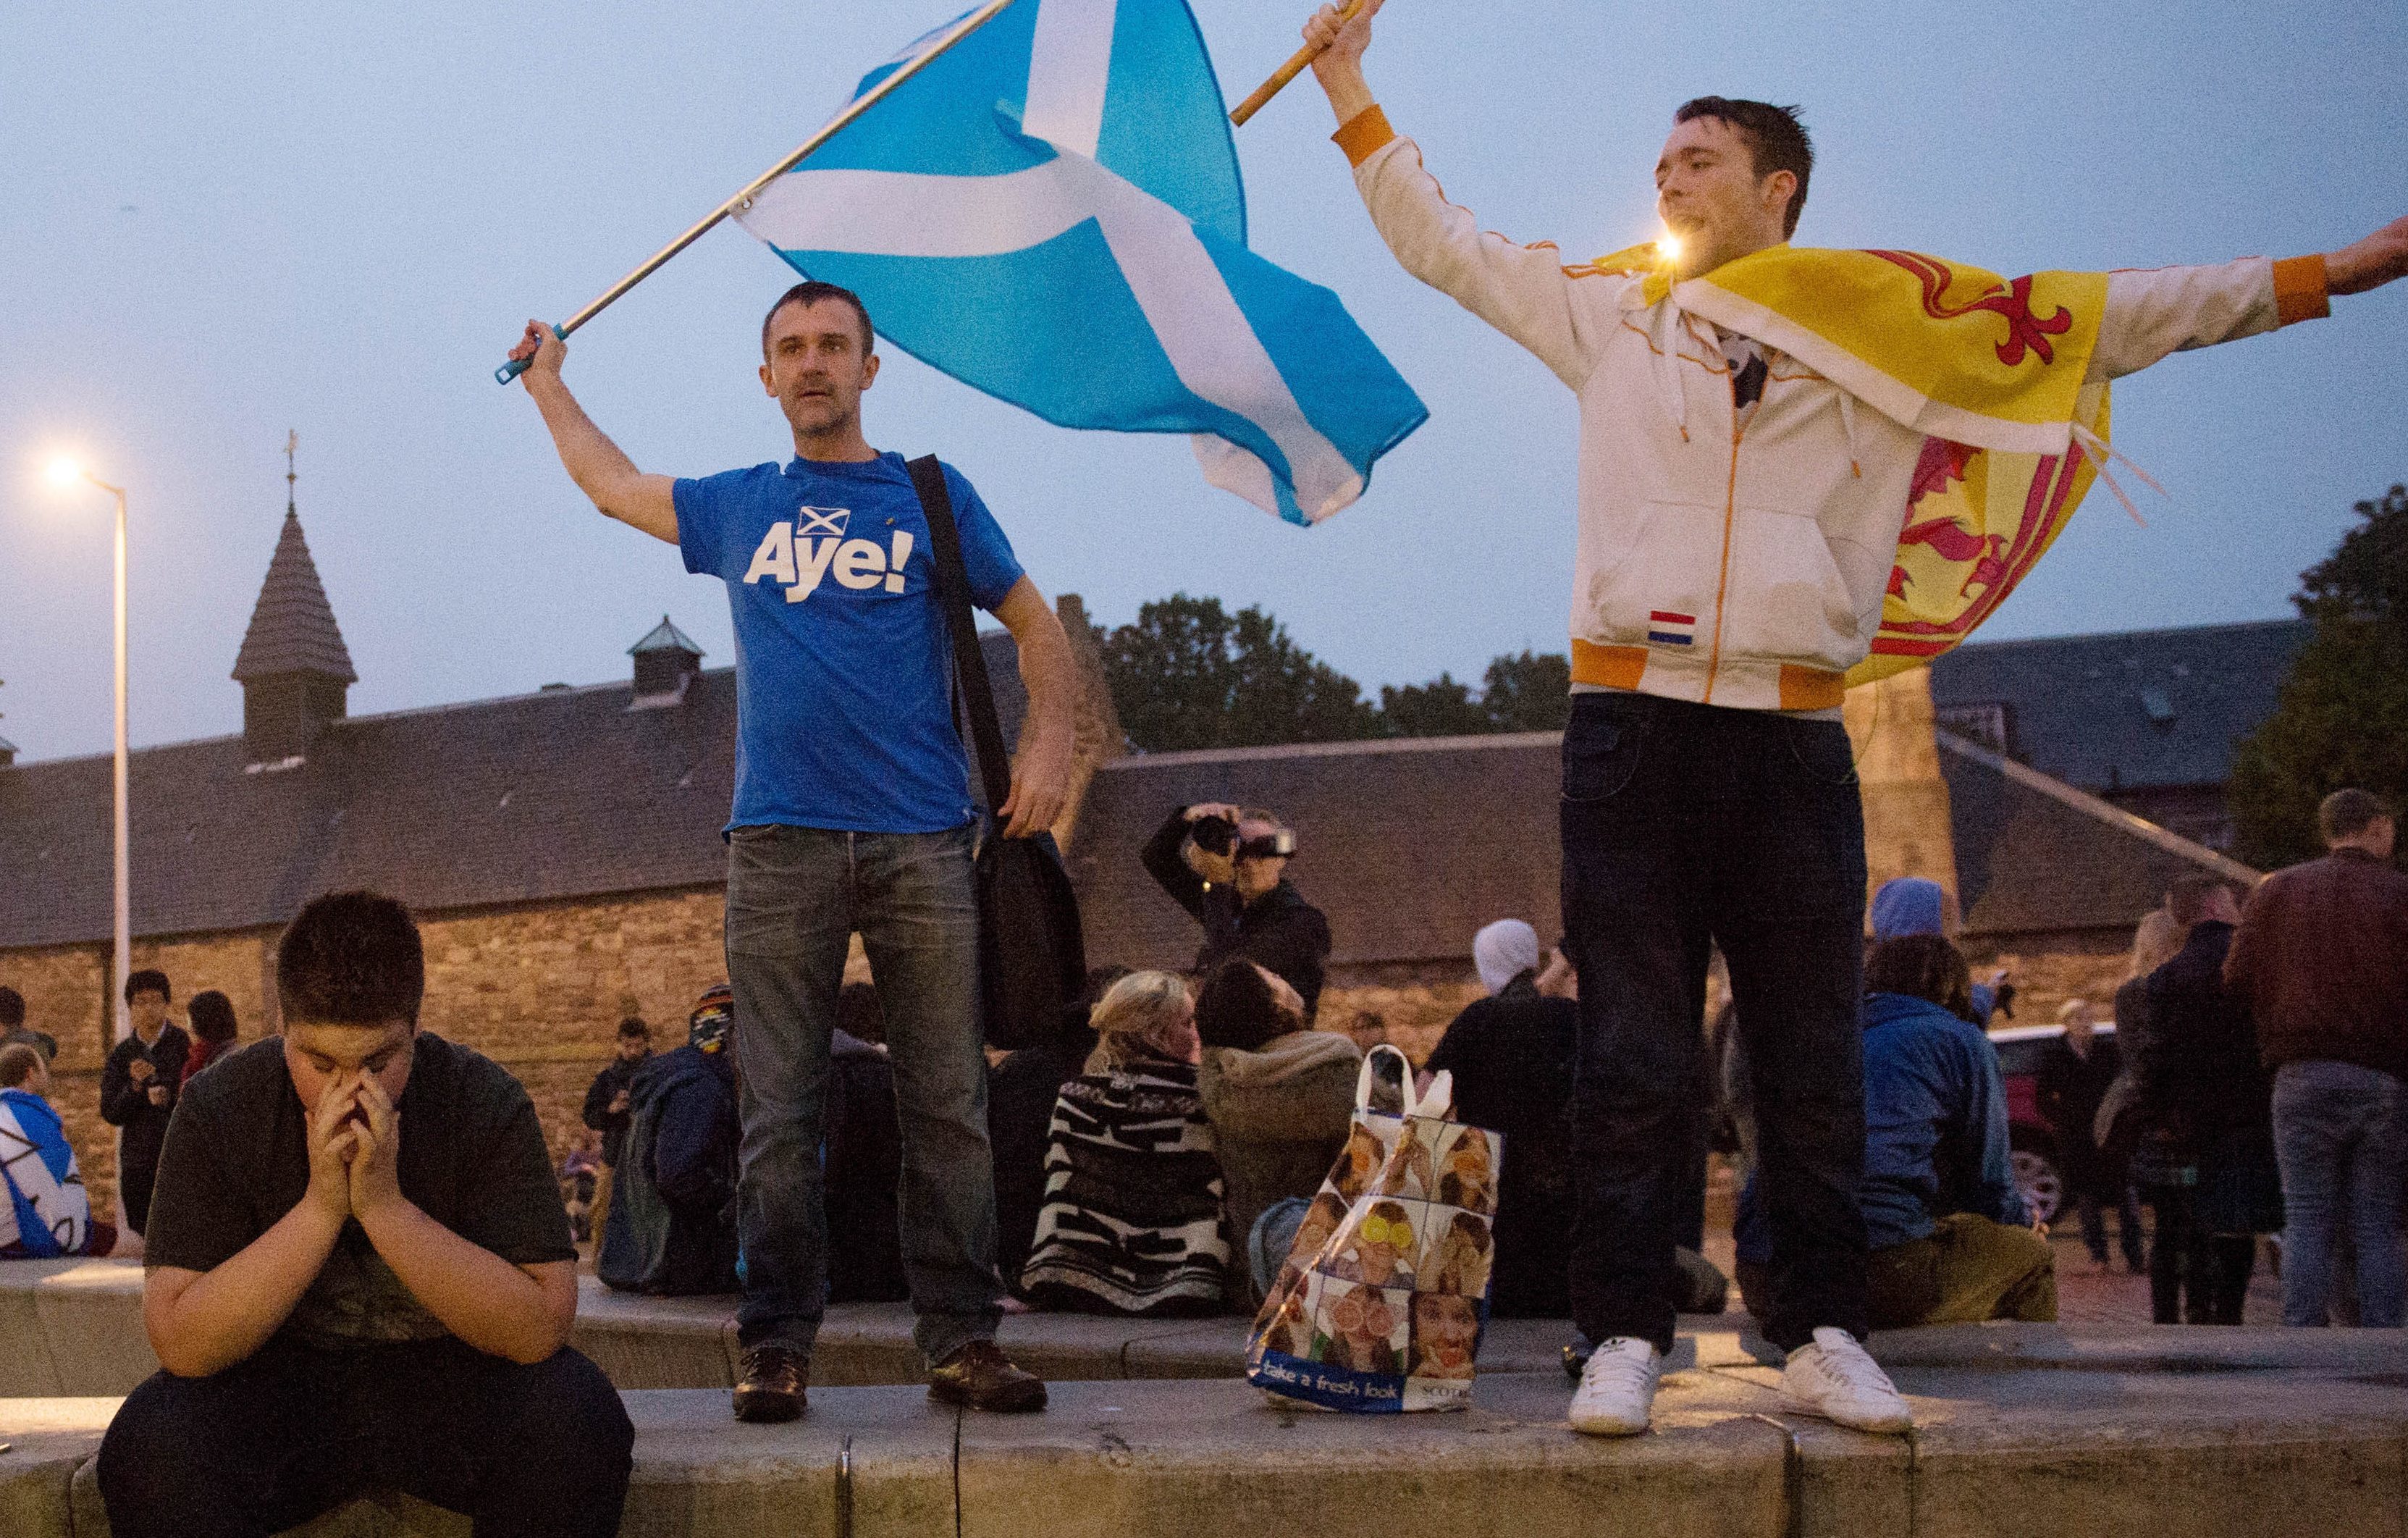 Defiant 'Yes' supporters in Edinburgh in the early hours after Scotland voted decisively to reject independence and remain part of the UK in September 2014.